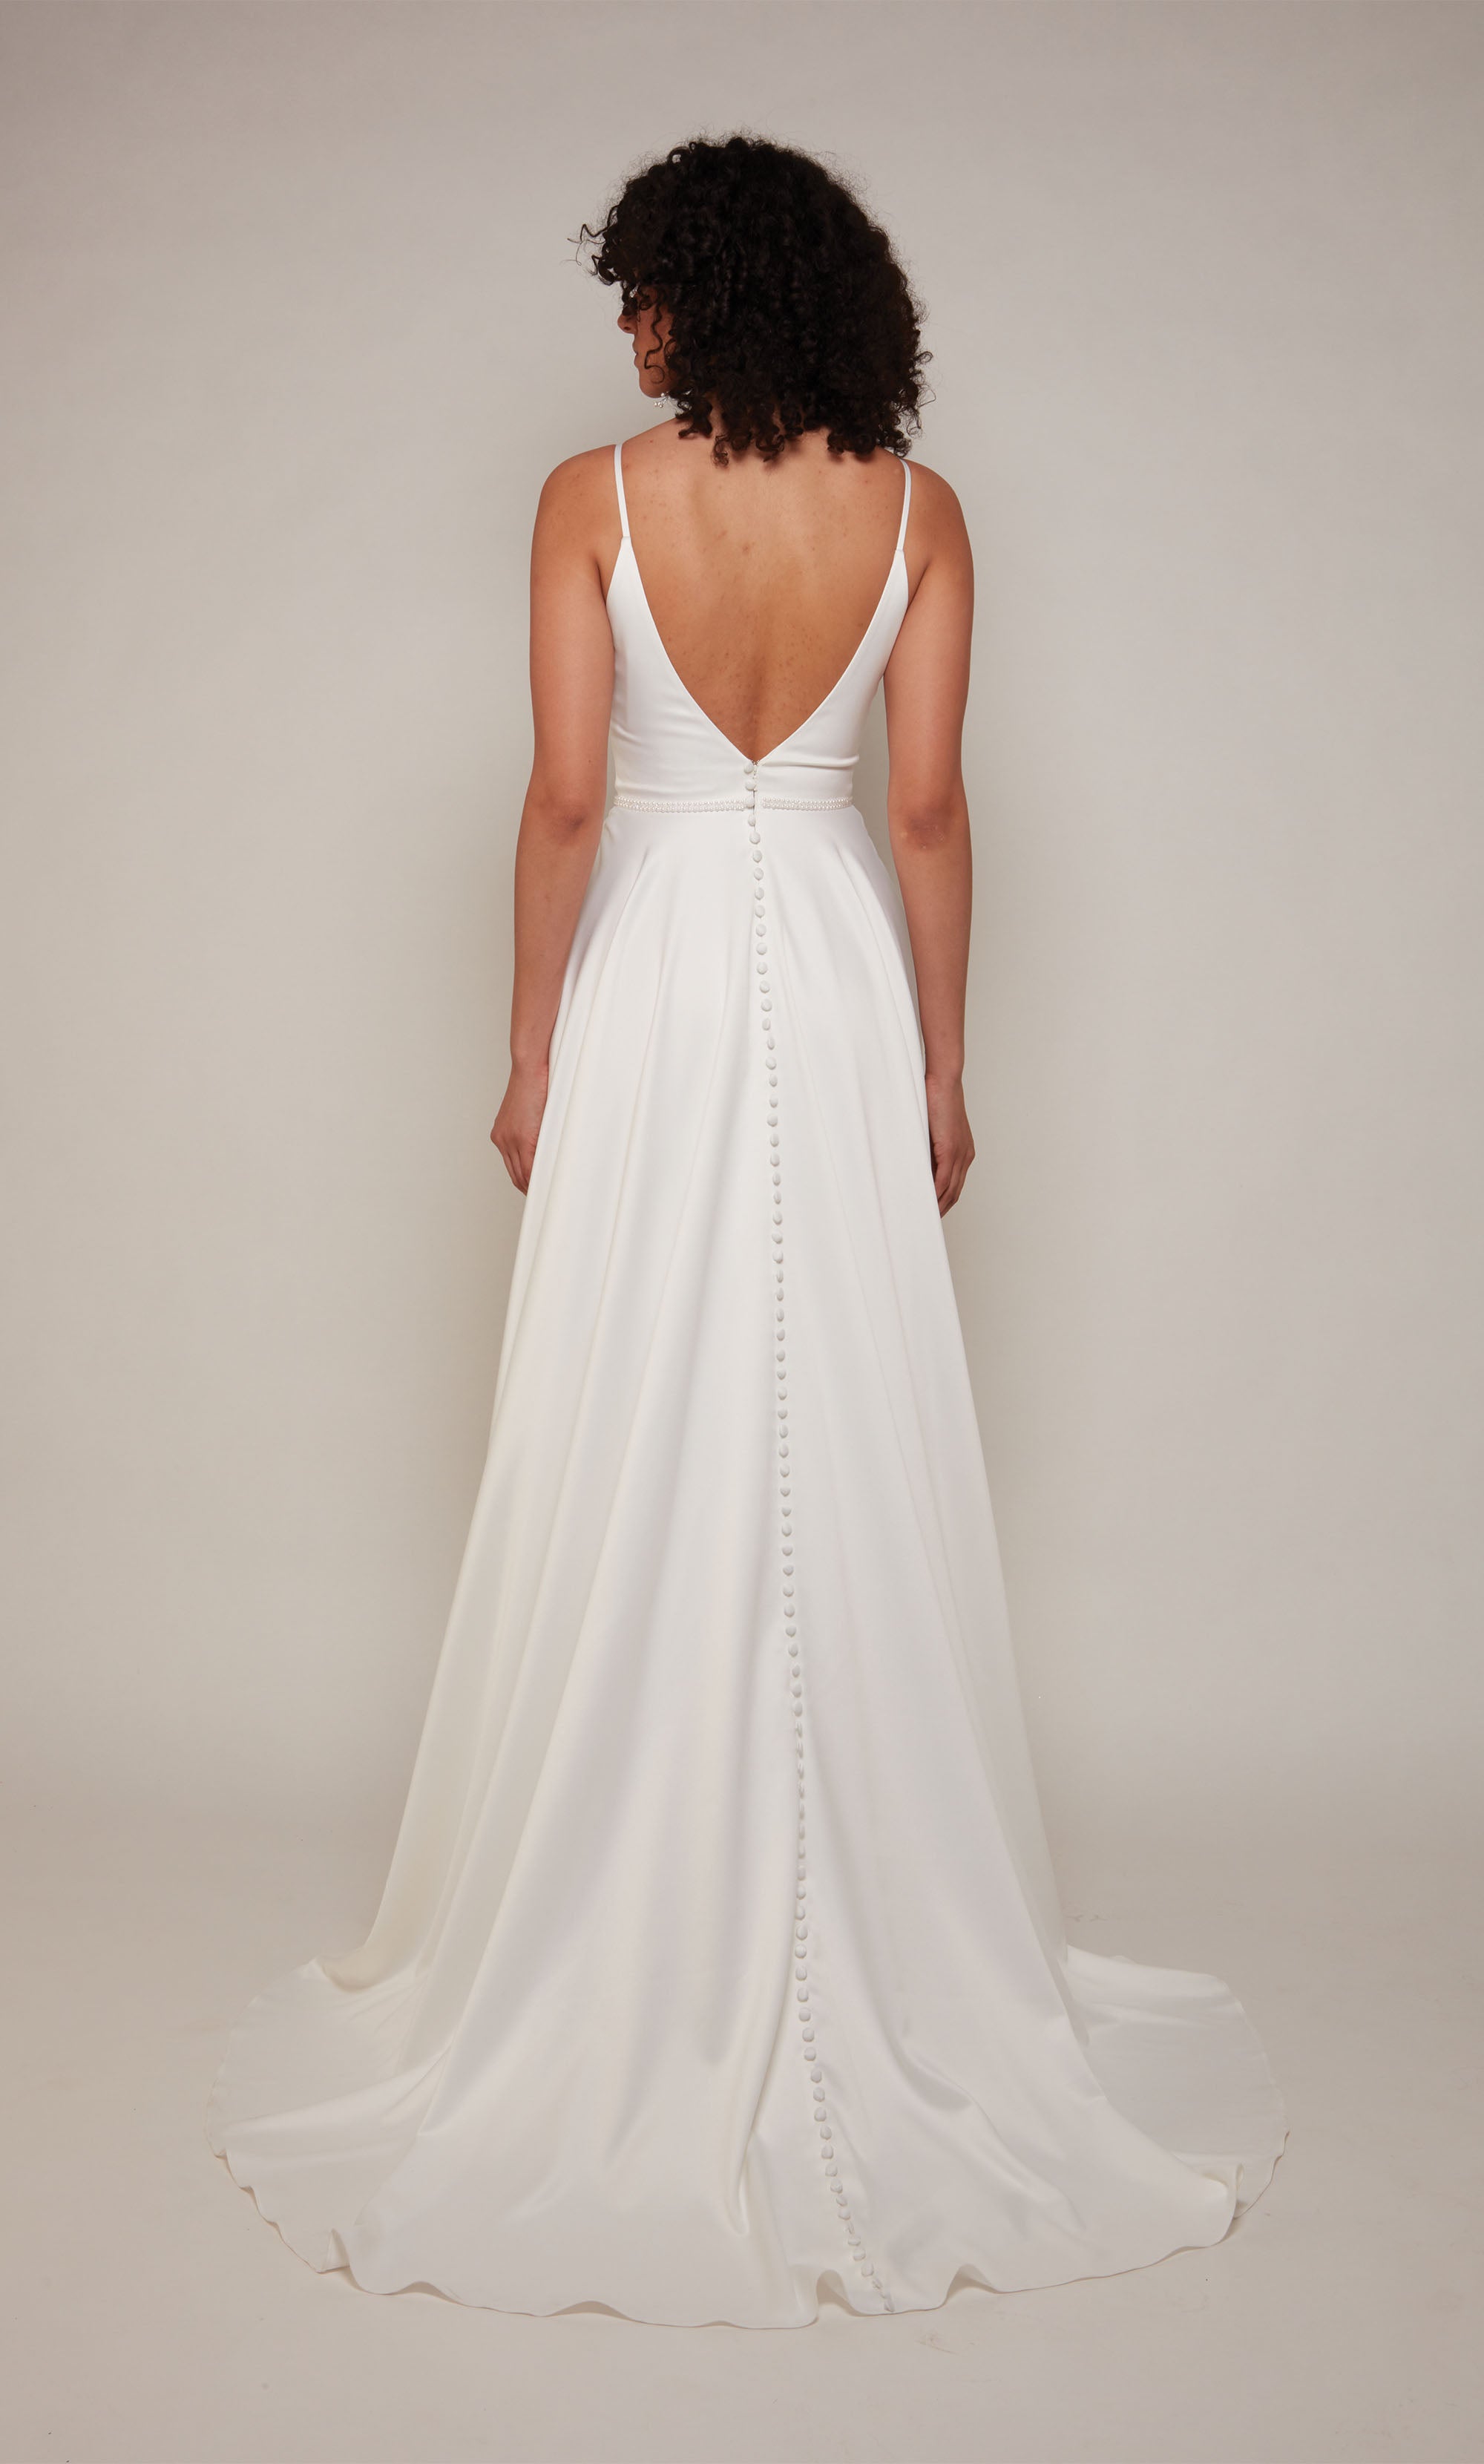 A simple, satin wedding dress with a V-neckline, an A-line skirt, pearl accented waistline, and V-shaped open back with satin covered buttons cascading down the back to the tip of the elegant train.